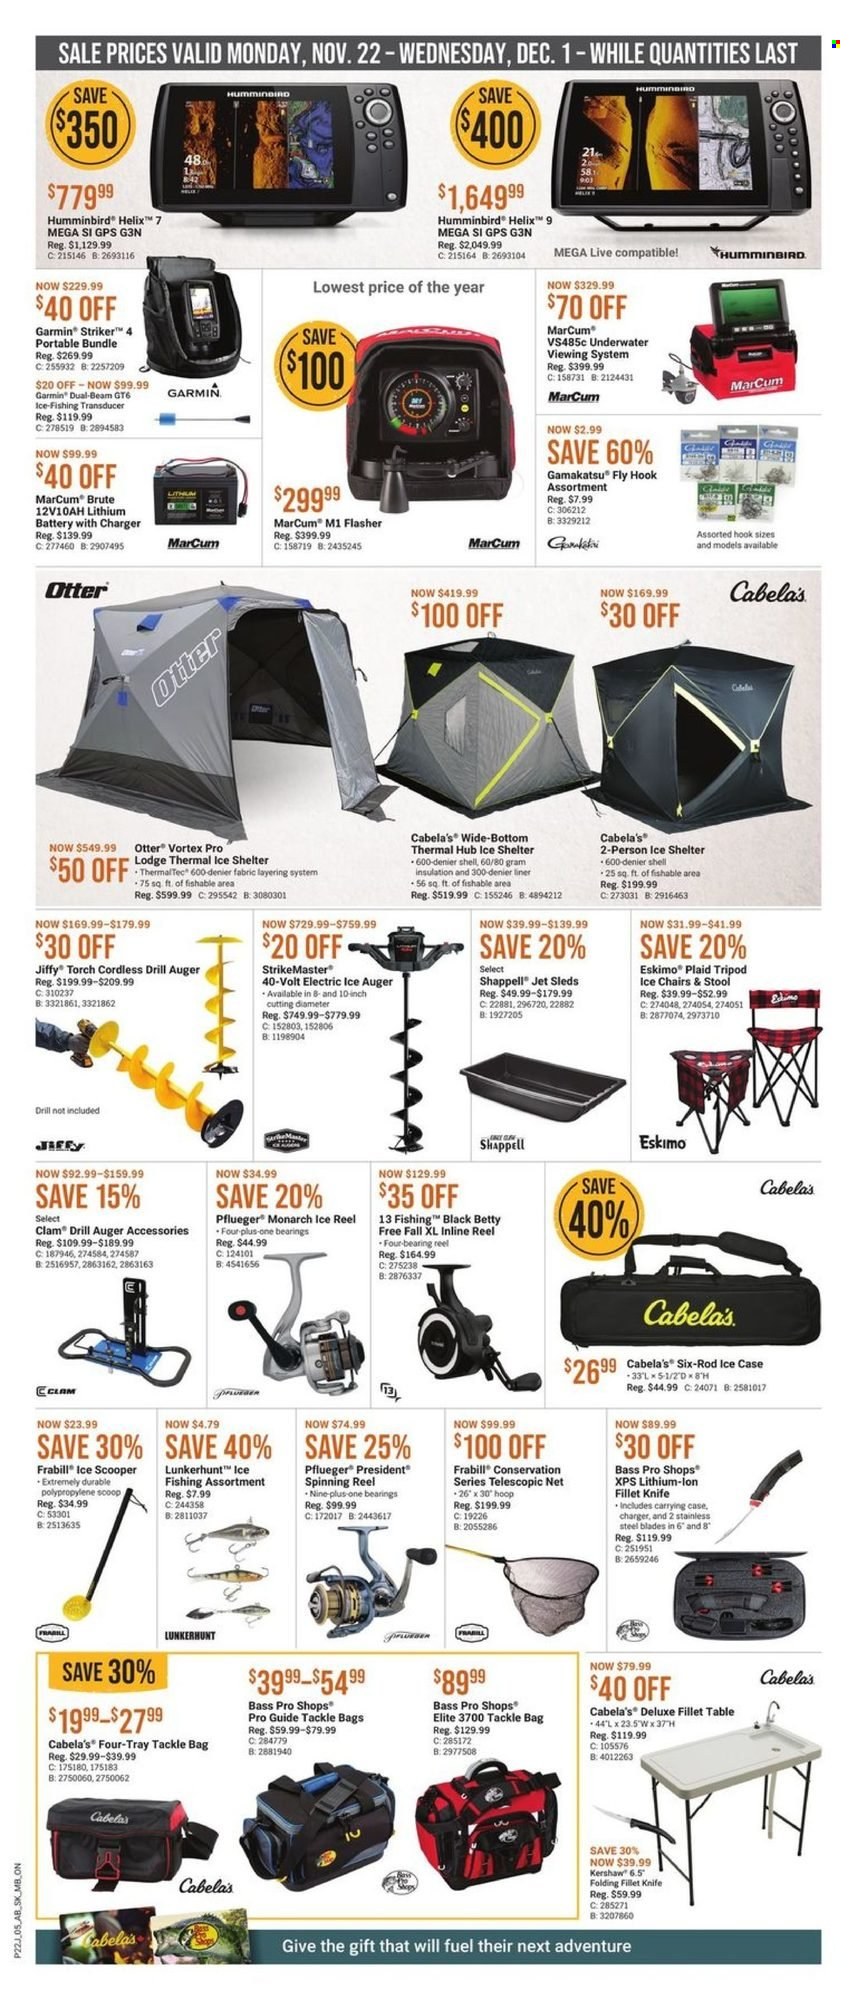 thumbnail - Bass Pro Shops Flyer - November 22, 2021 - December 01, 2021 - Sales products - Garmin, Monarch, tripod, Bass Pro, torch, chair, Kershaw, reel, spinning reel, ice fishing, ice shelter, tackle bag, Jiffy. Page 5.